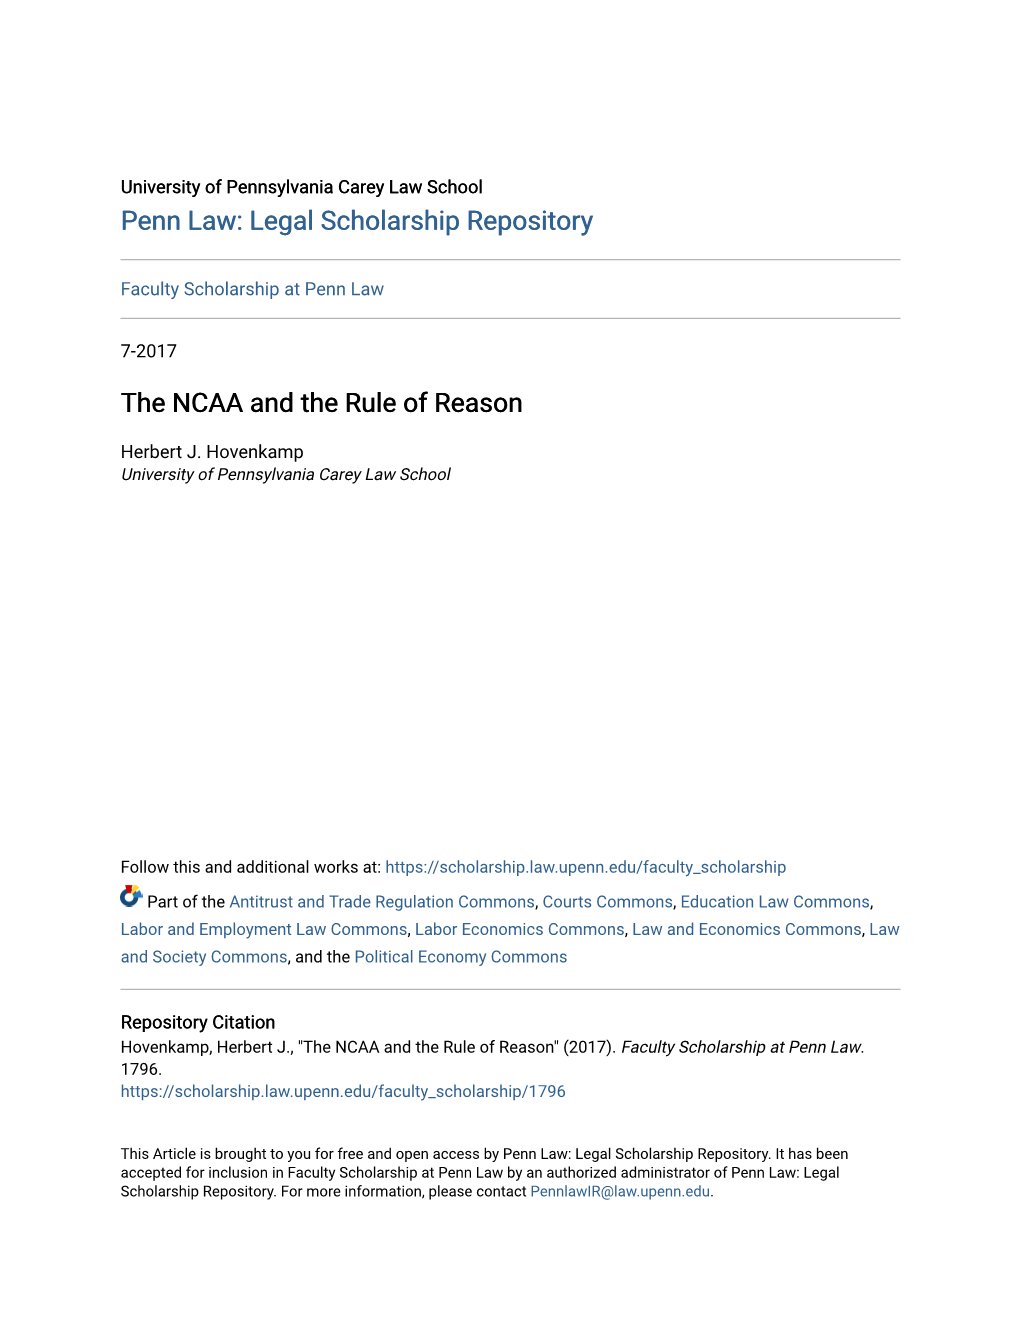 The NCAA and the Rule of Reason